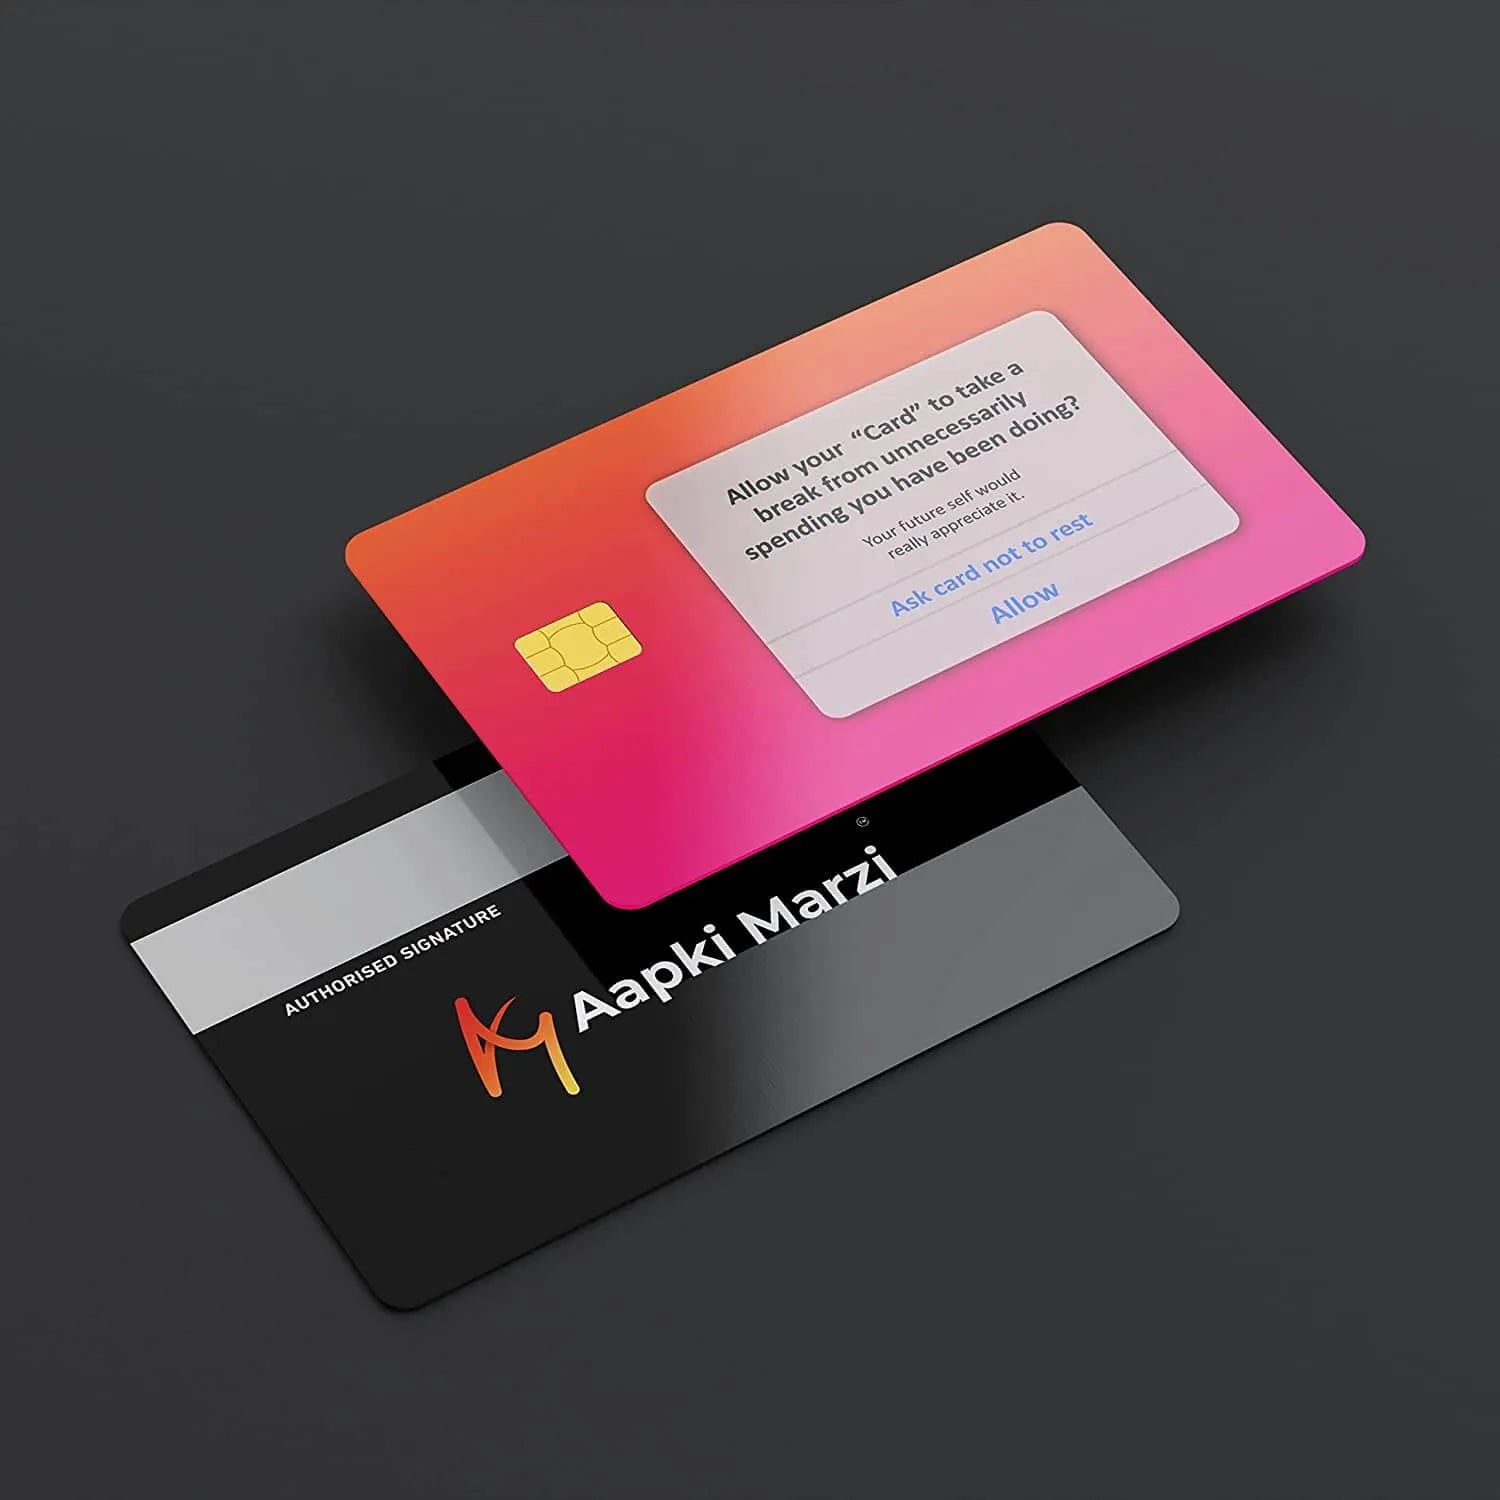 Unnecessary Spending Credit Card Skins